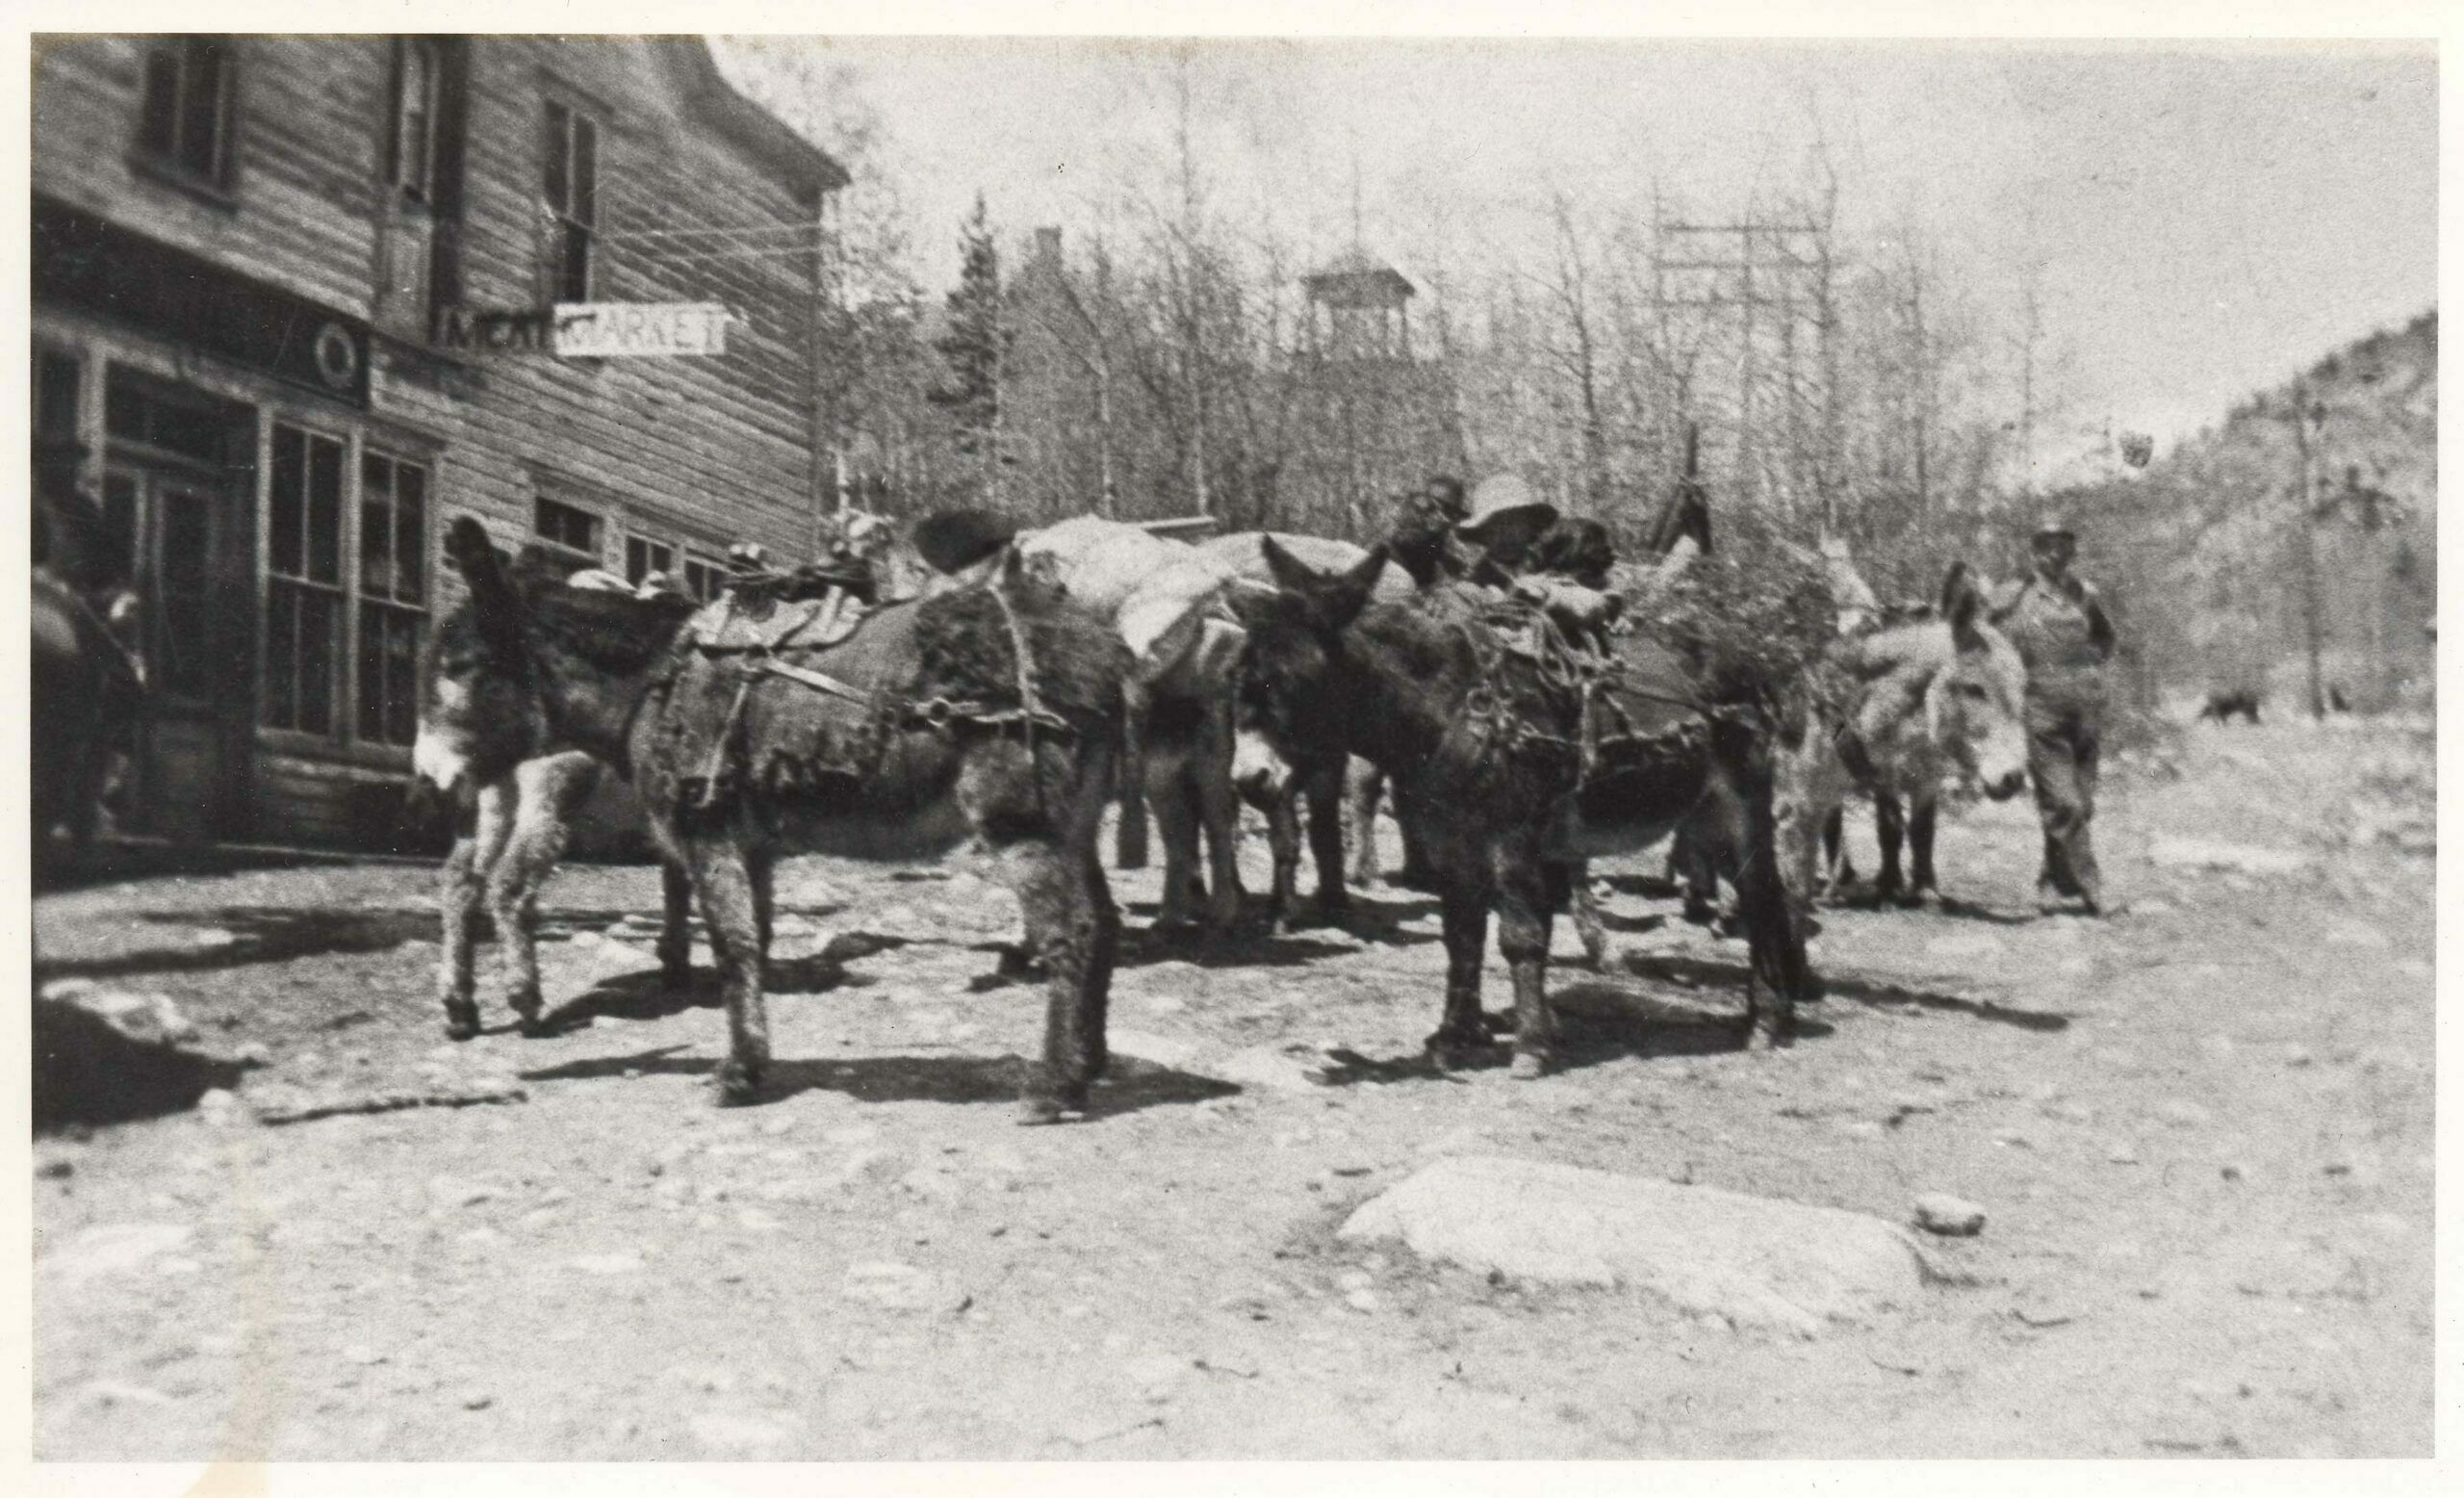 West of St. Elmo, 12,154 foot Tincup Pass provided one of the early access routes to Western Slope mining areas. Burro trains such as this one loading in front of the St. Elmo Hardware provided quick, inexpensive and relatively sure transportation for most general supplies. After arrival of the Denver, South Park and Pacific Railroad, the town became a major shipping point for heavy freight as well and there were a dozen or more companies that were able to handle almost any kind of shipment. Busy winter stagecoach traffic forced drivers to replace wheels with sled runners for the hazardous trip over the Continental Divide between 13,555-foot Emma Burr Mountain to the north and 13,124-foot Fitzpatrick Peak to the south.  (1)